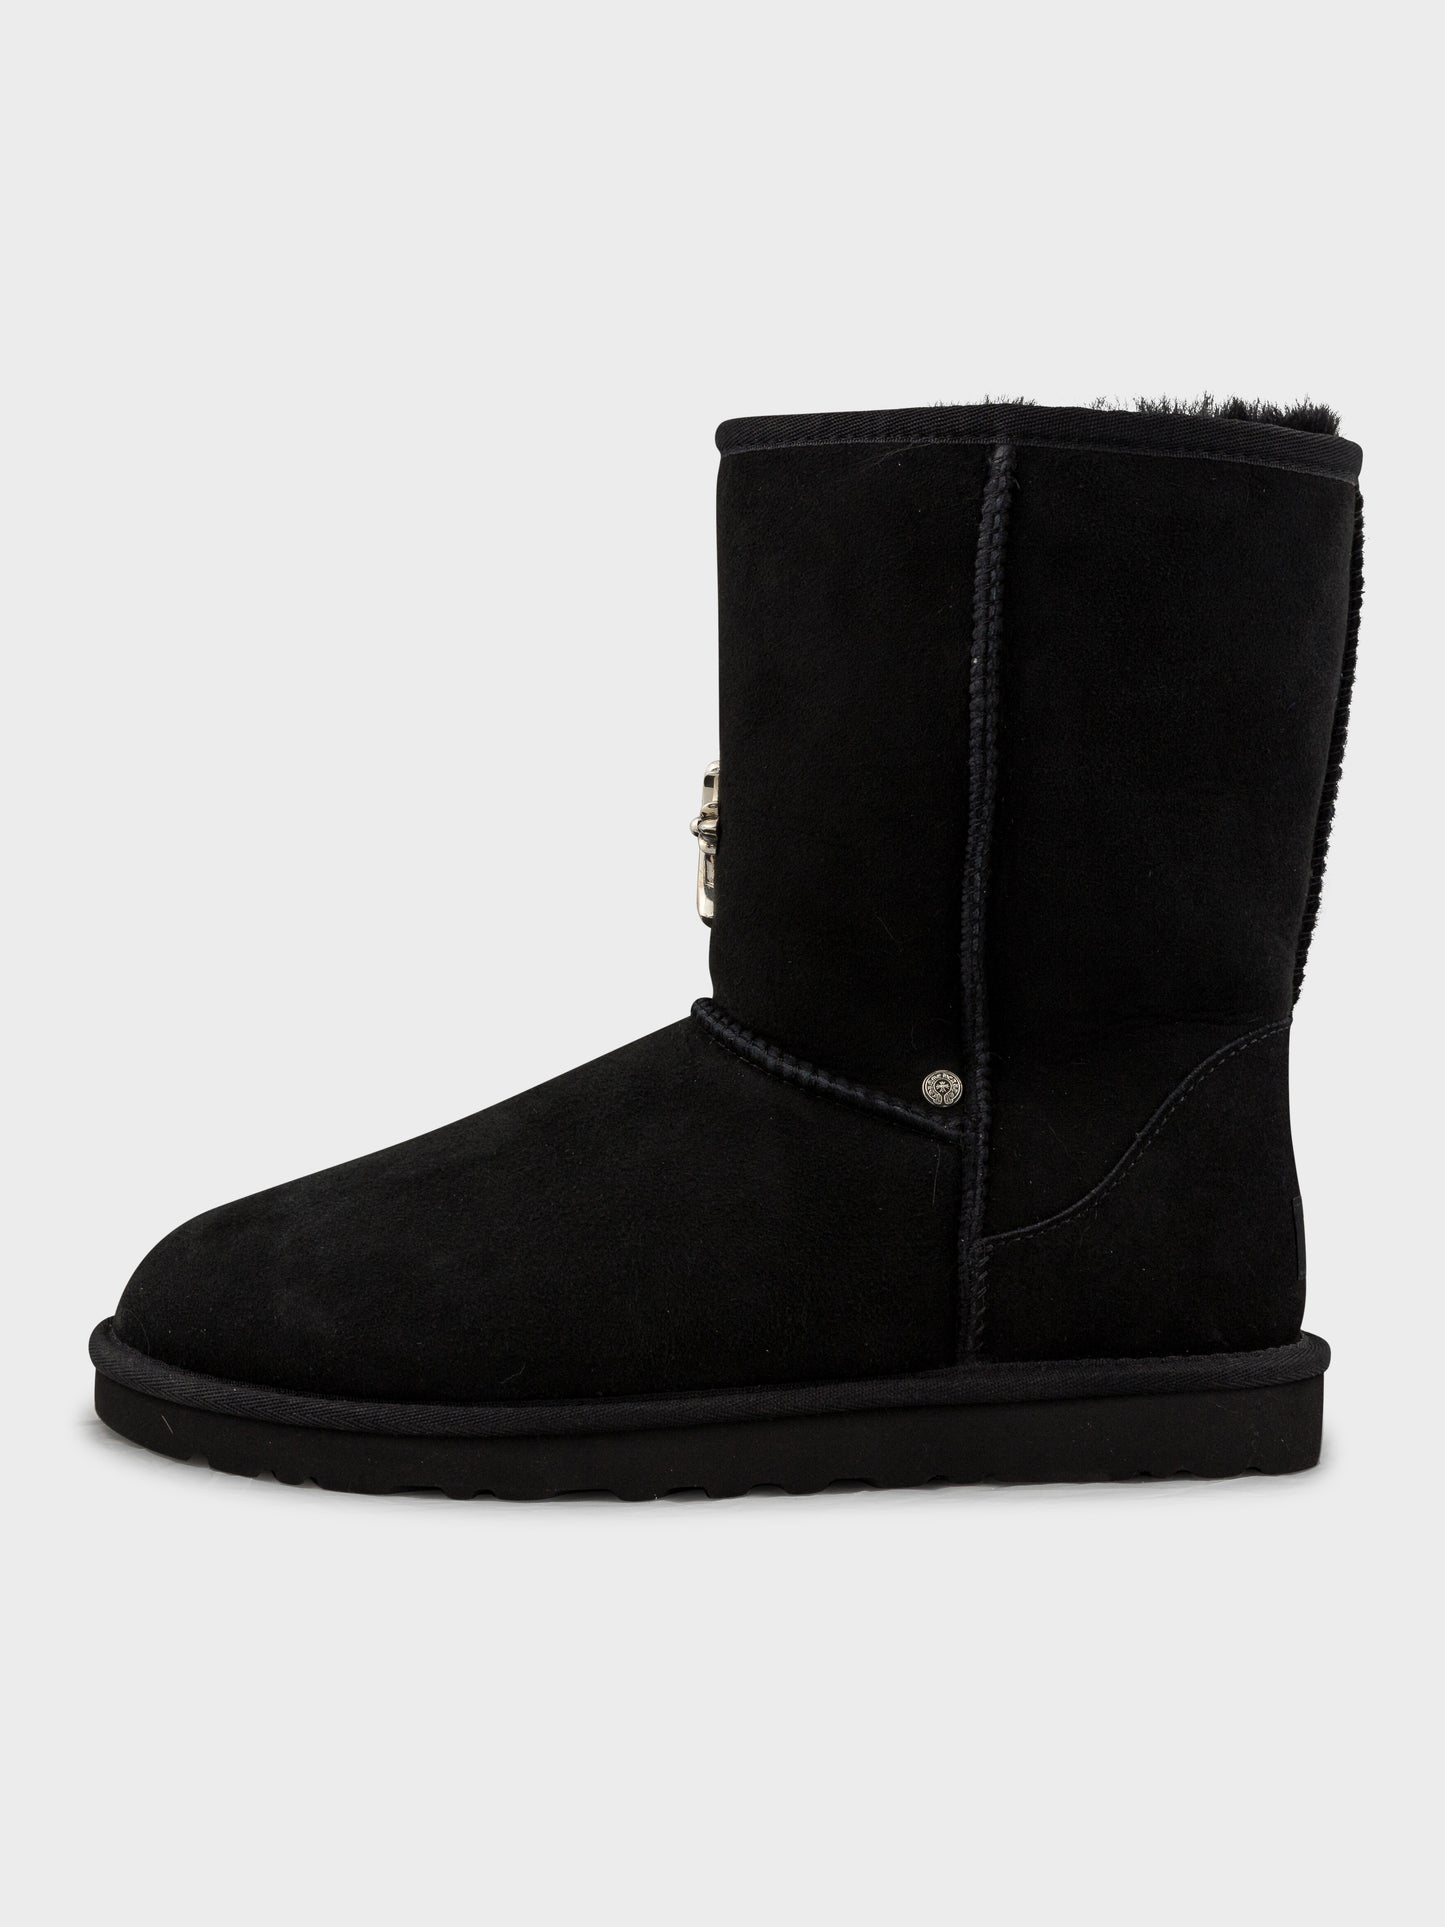 Buy Chrome Hearts Chrome Hearts Ugg Boots Online at Groupie